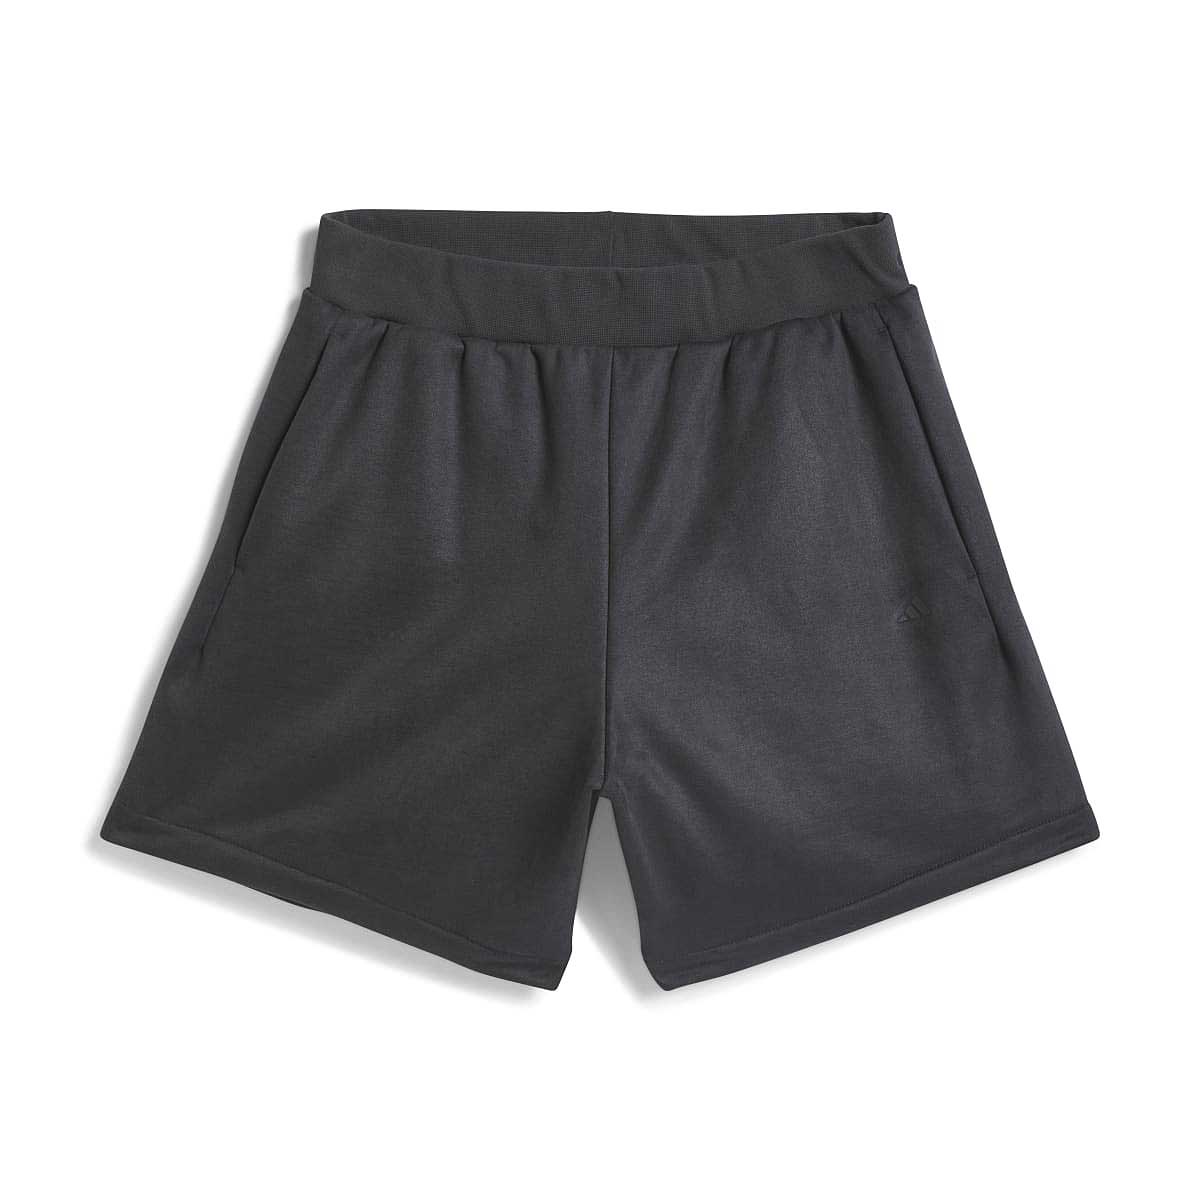 Image of Adidas Basketball Sueded Shorts, Carbon